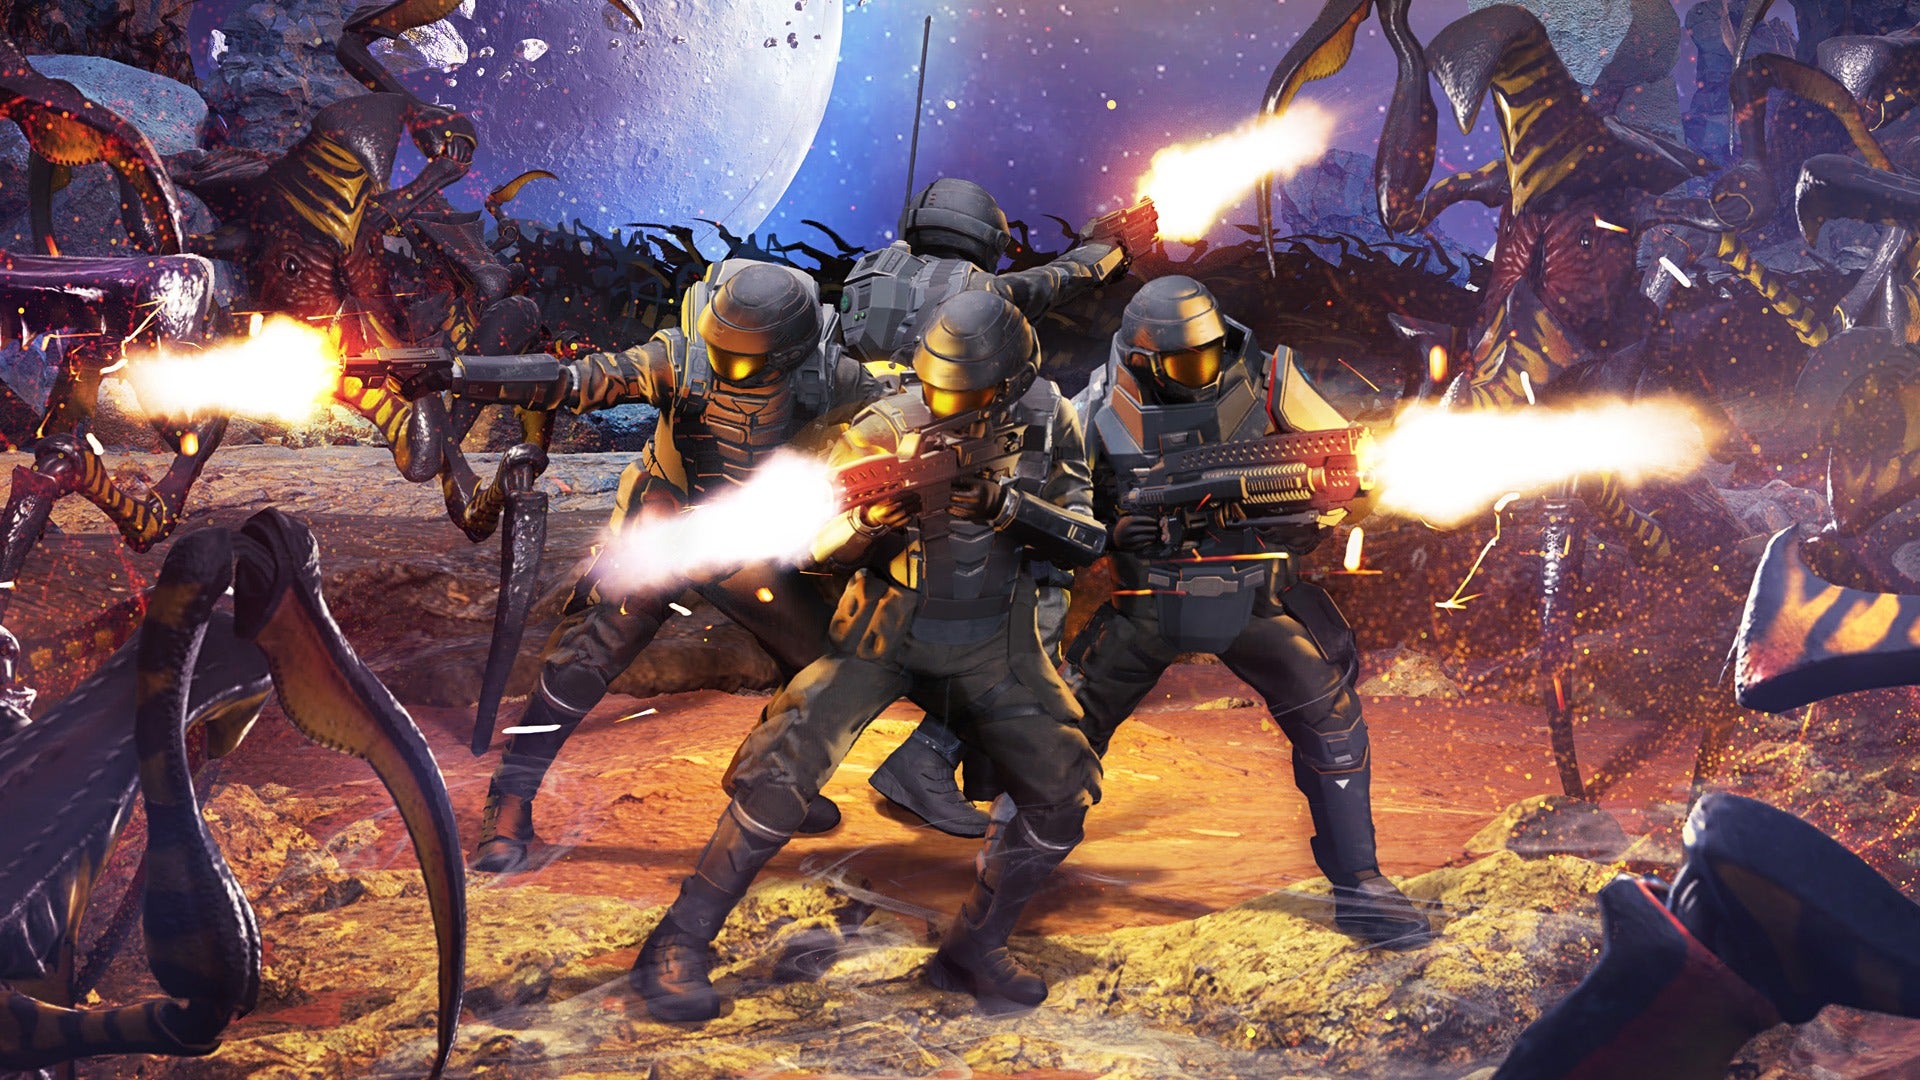 Co-op shooter Starship Troopers Extermination starts its bug hunt in 2023 Rock Paper Shotgun